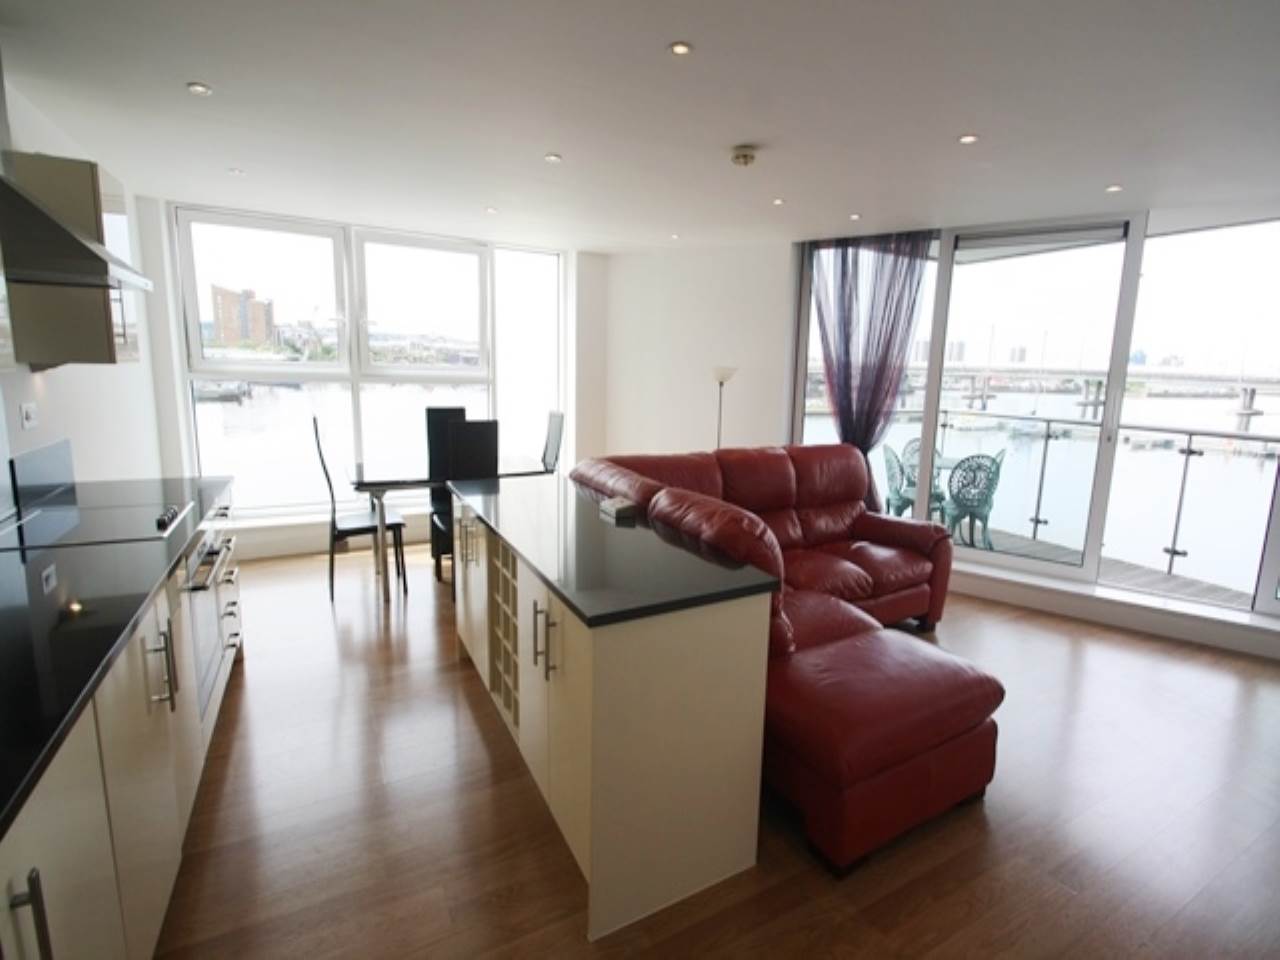 2 bed flat to rent in The Mast, Albert Basin Way - Property Image 1